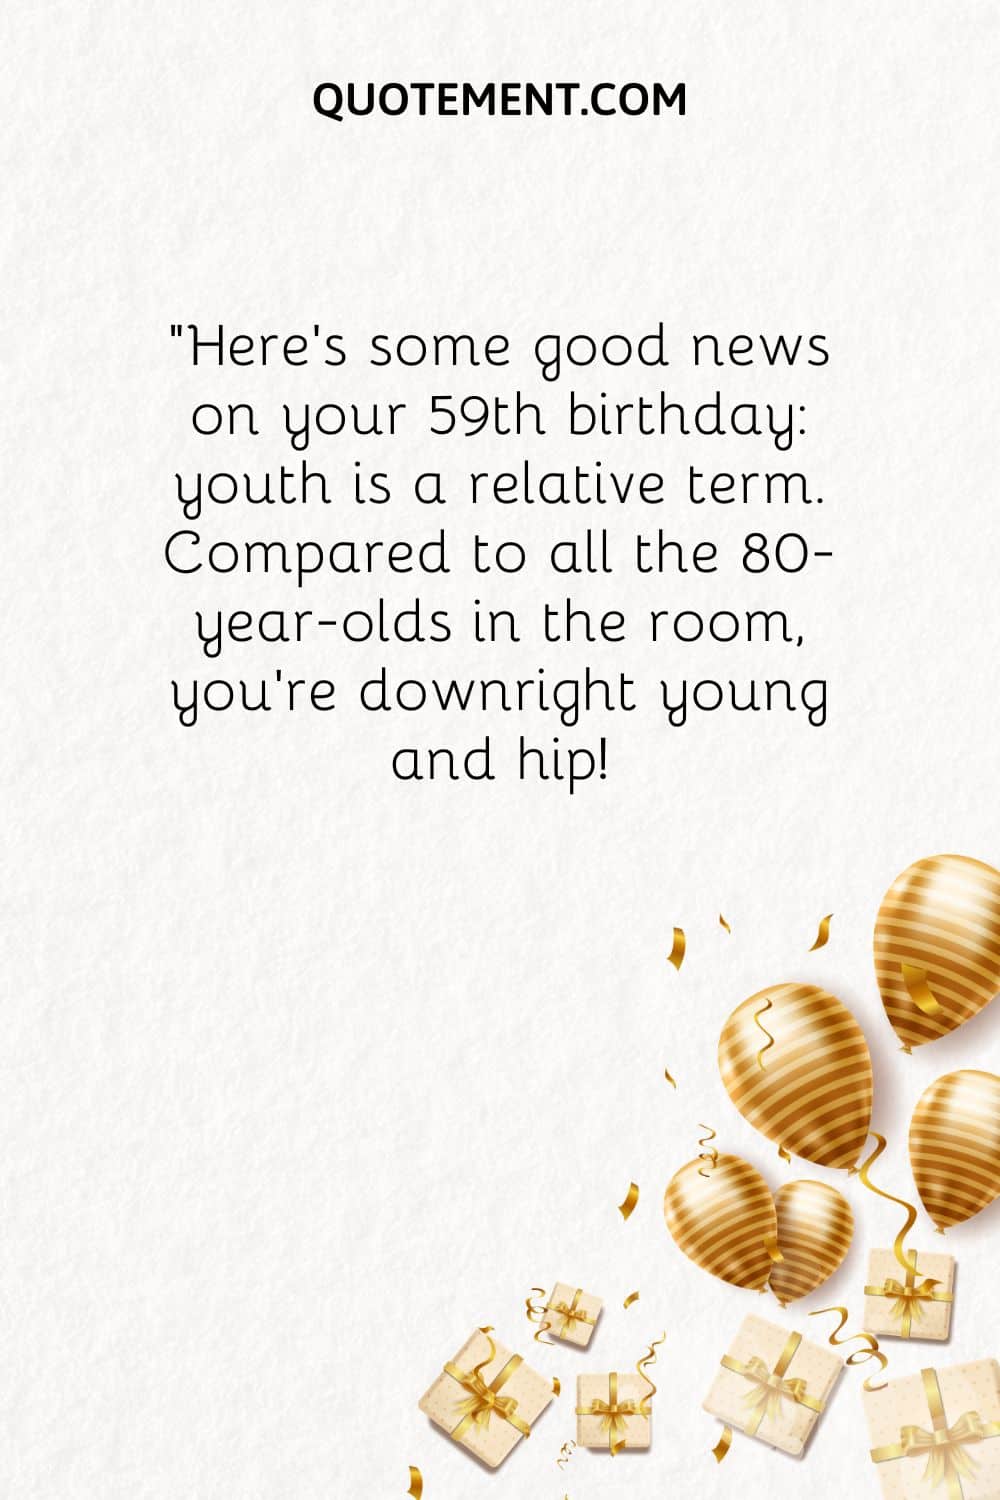 Here’s some good news on your 59th birthday